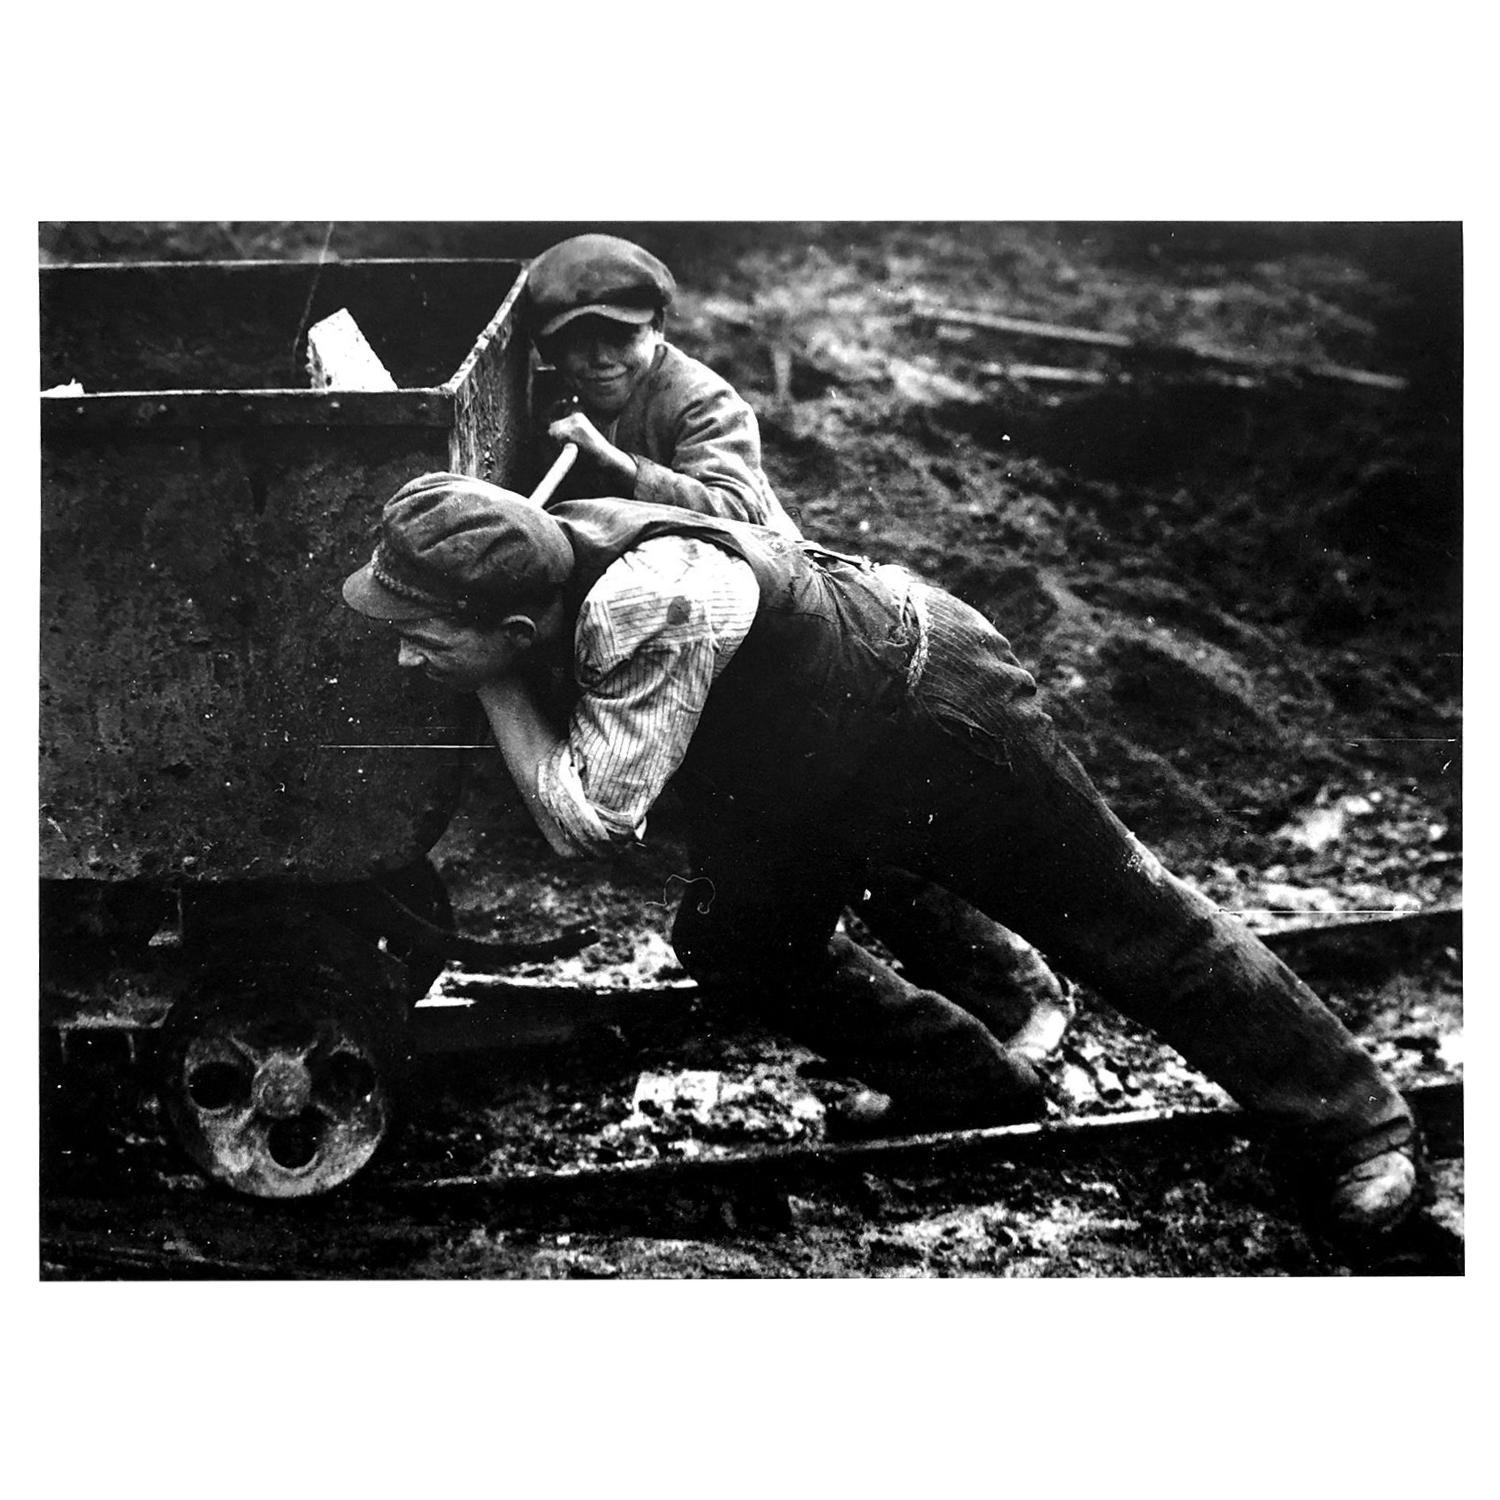 Young boys pushing wheel barrel by Martin Munkacsi
Silver Gelatin Print
Image size: 9.63 in. H x 12.75 in. W
Sheet size: 12 in. H x 15.5 in. W
Stamped on verso 'copyright Estate Martin Munkacsi'

Martin Munkácsi (born Mermelstein Márton; 18 May